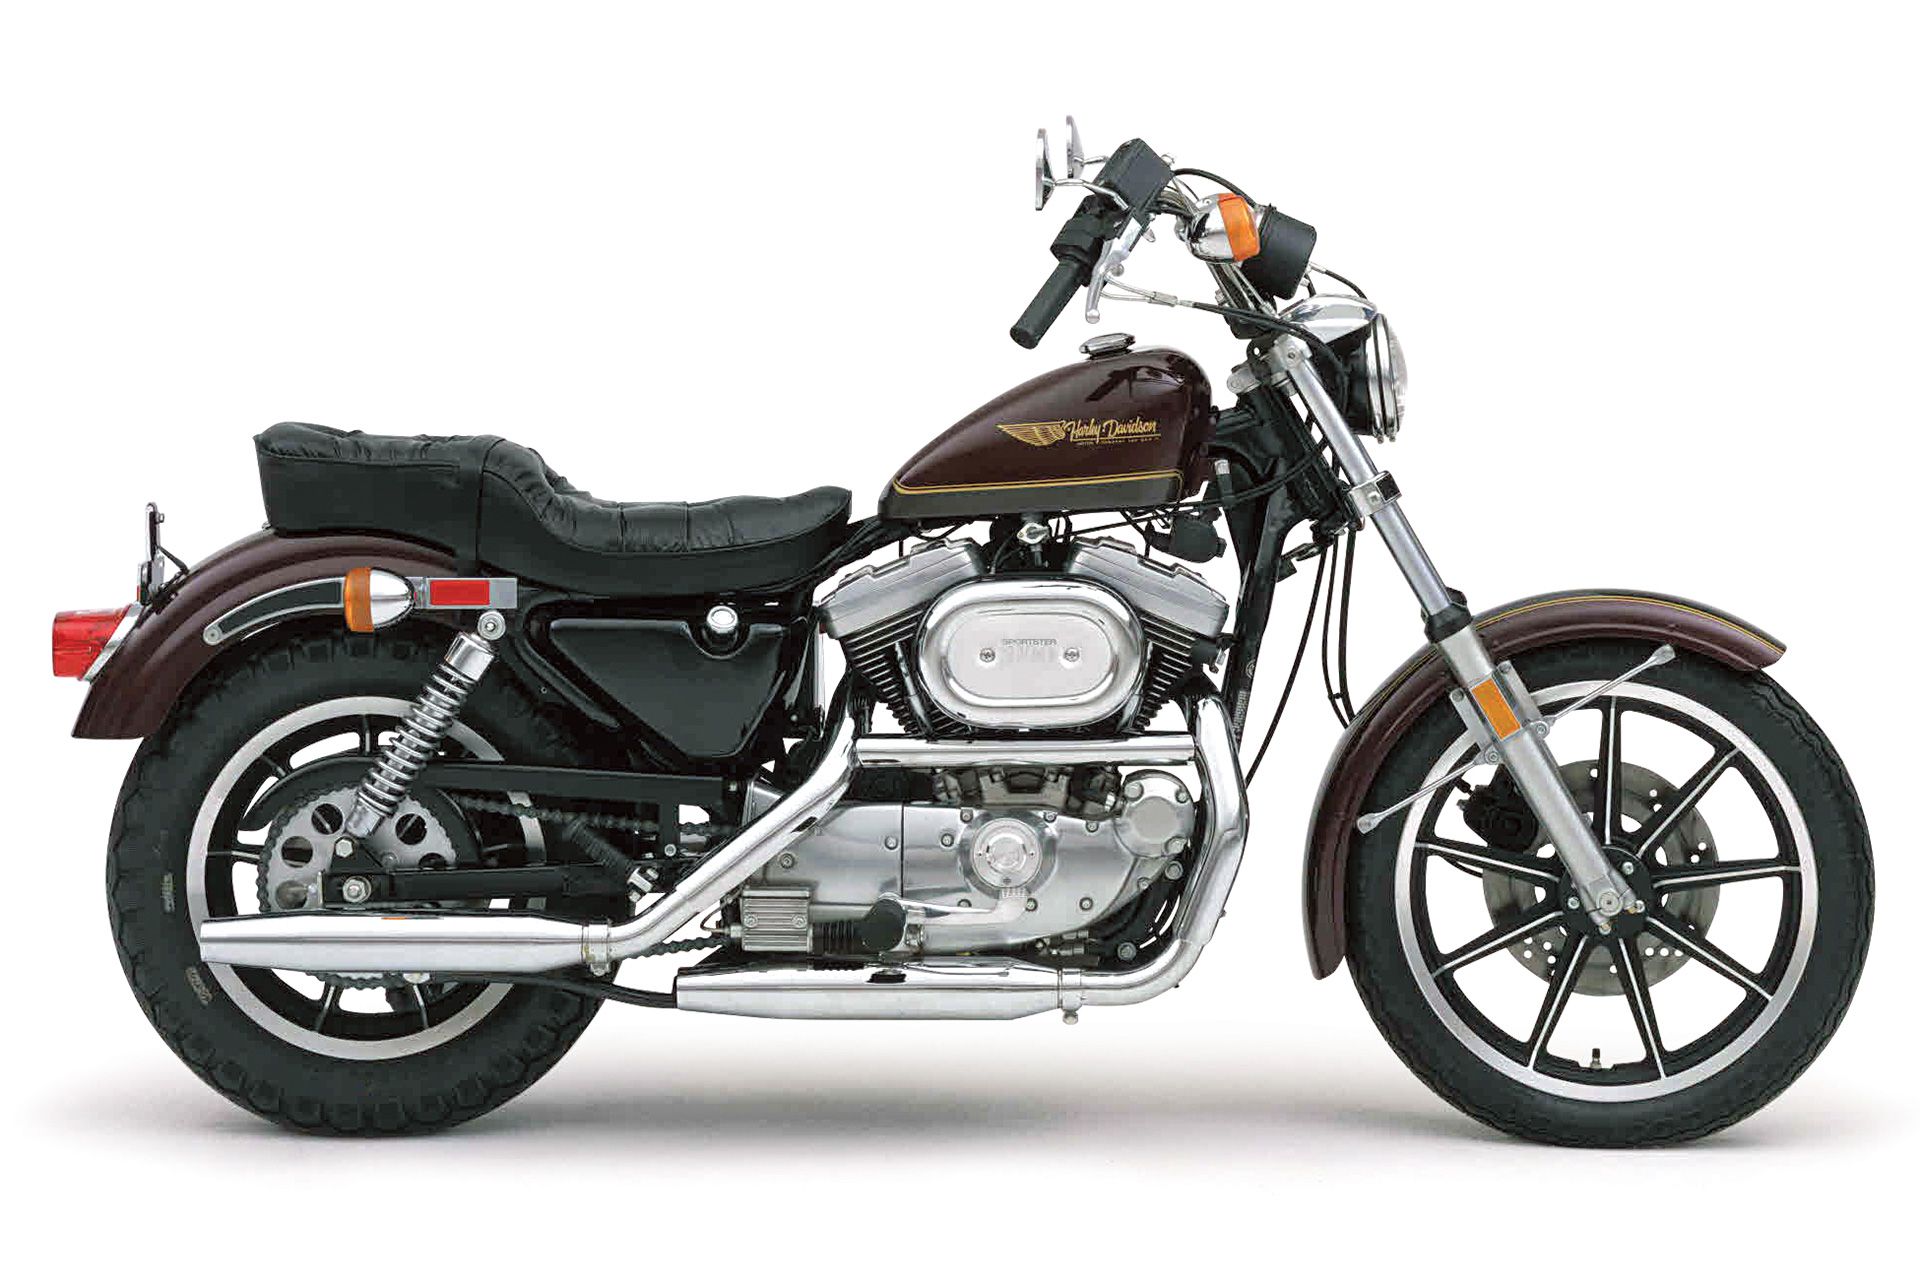 Harley Davidson Sportster Best Used Motorcycles Cycle World